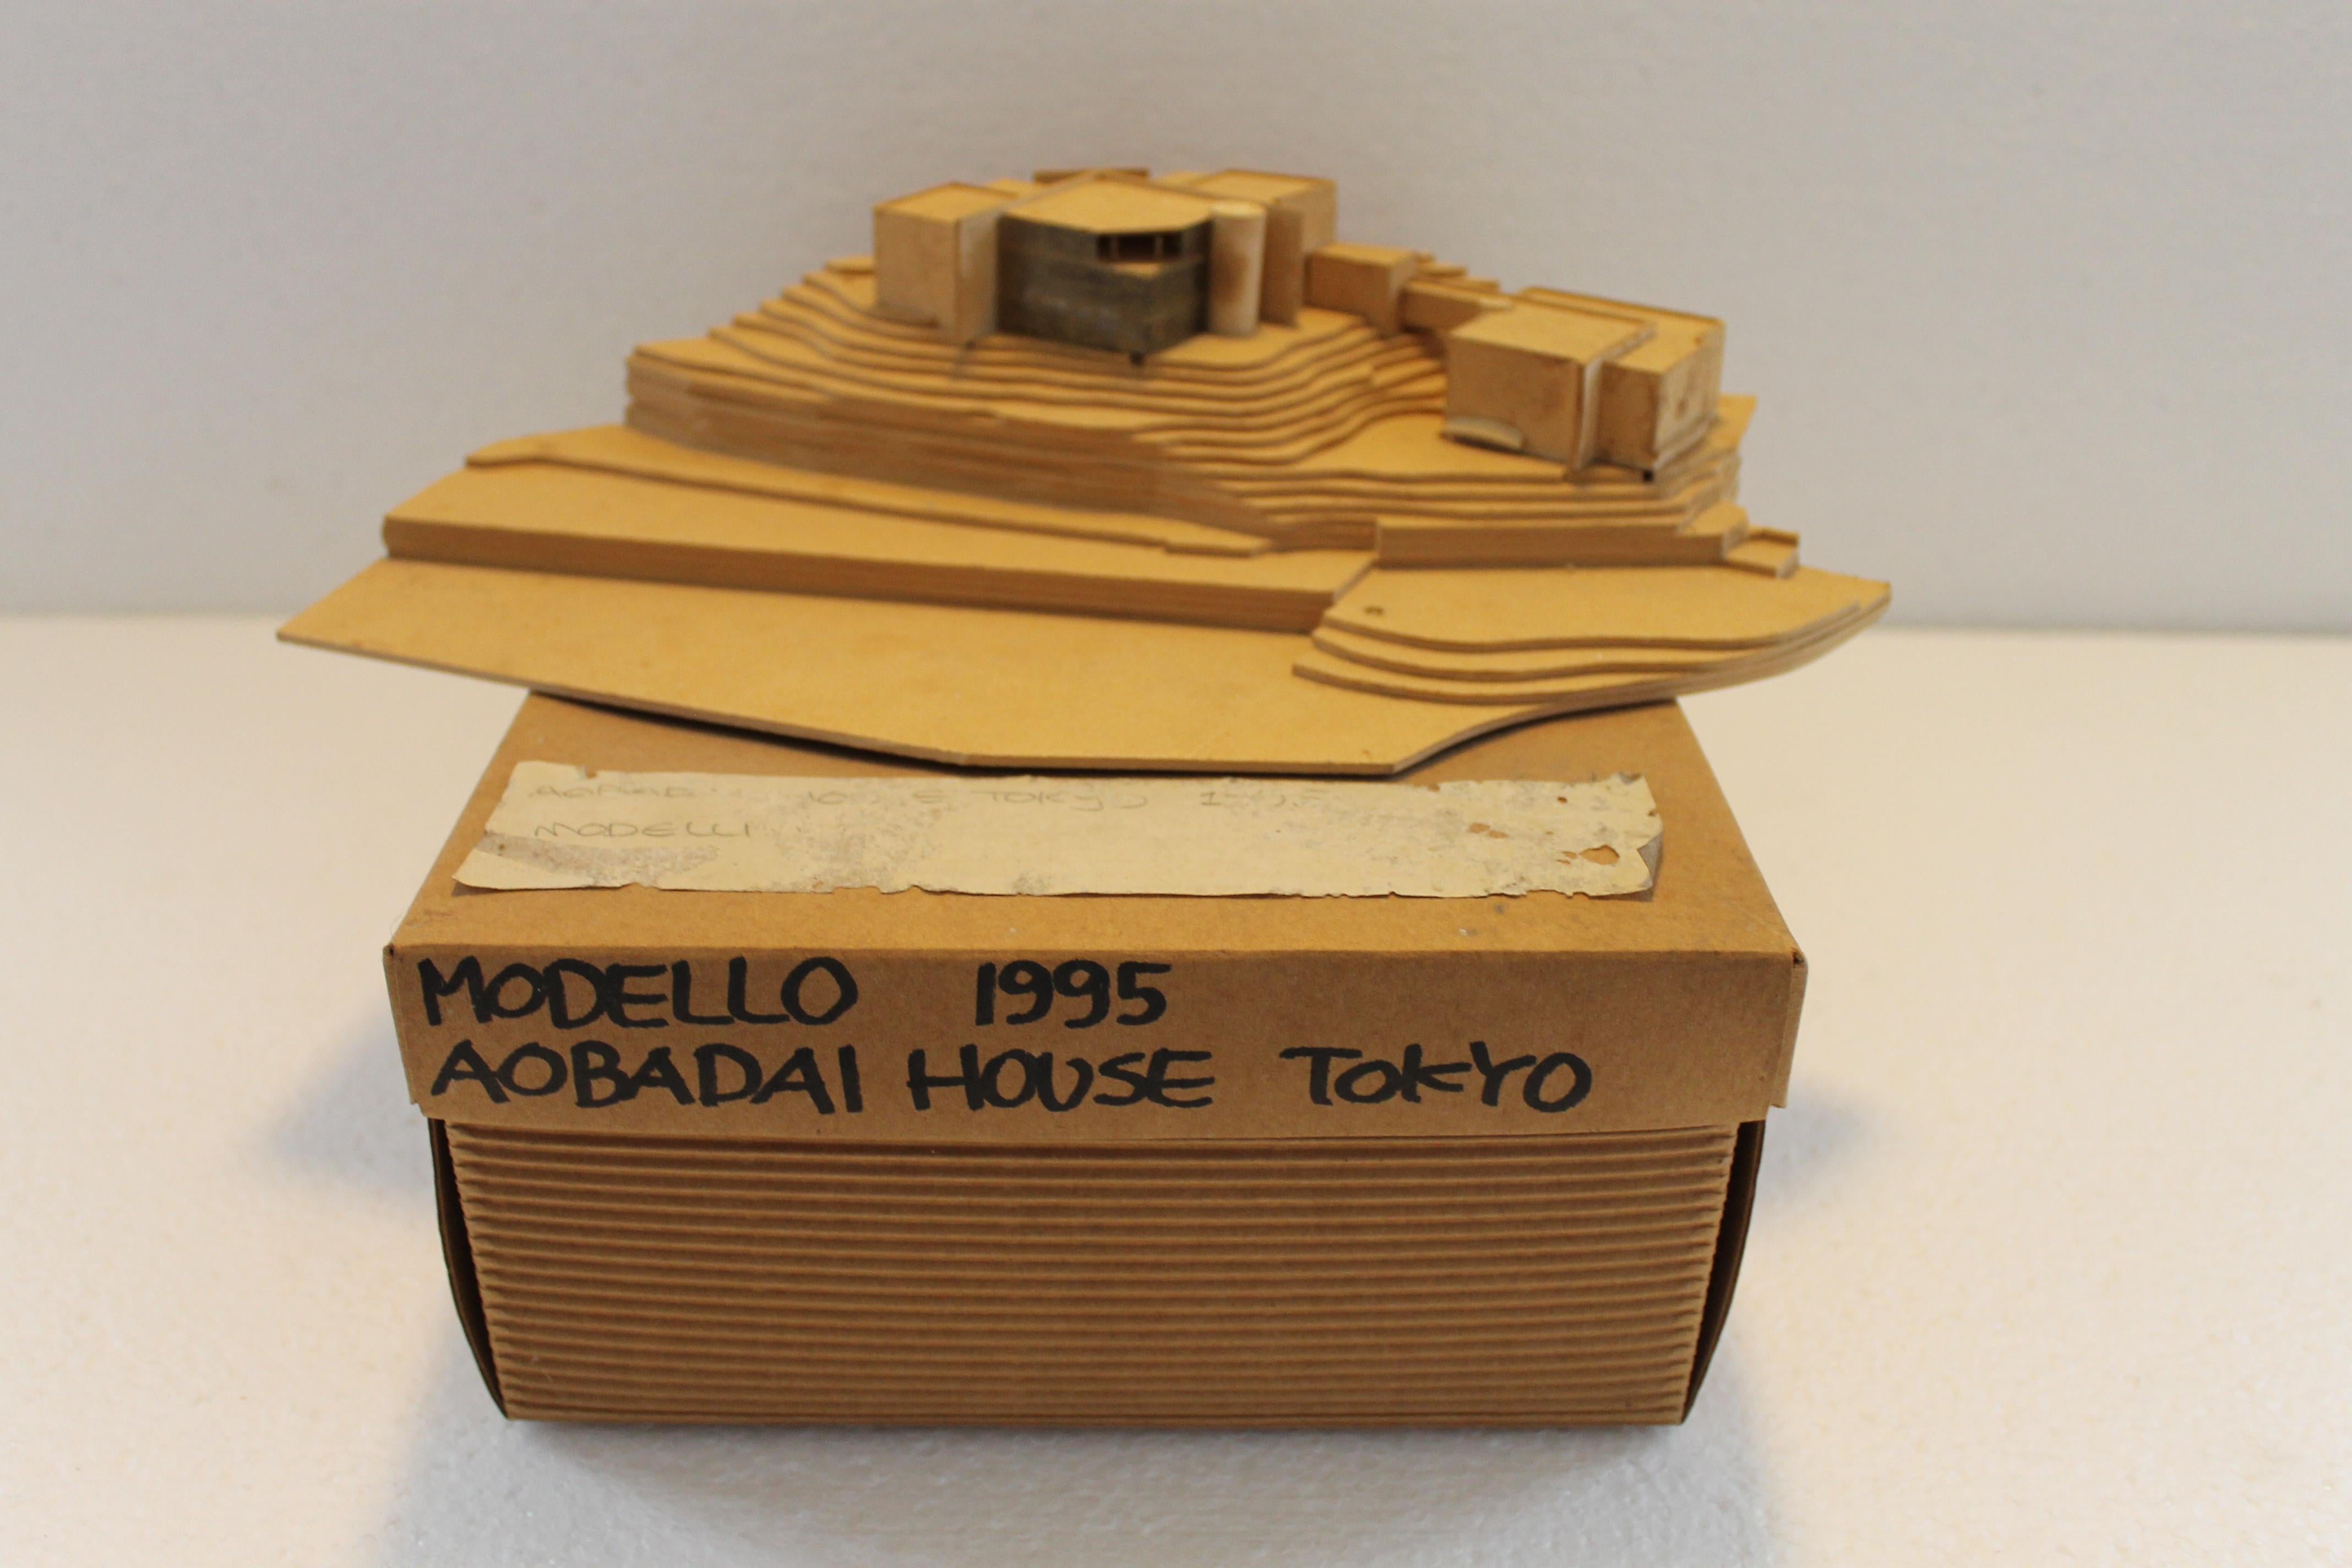 Afra and Tobia Scarpa Model 'Maquette' of Aobadai House, Tokyo 'Japan' 1995 In Good Condition For Sale In Sacile, PN